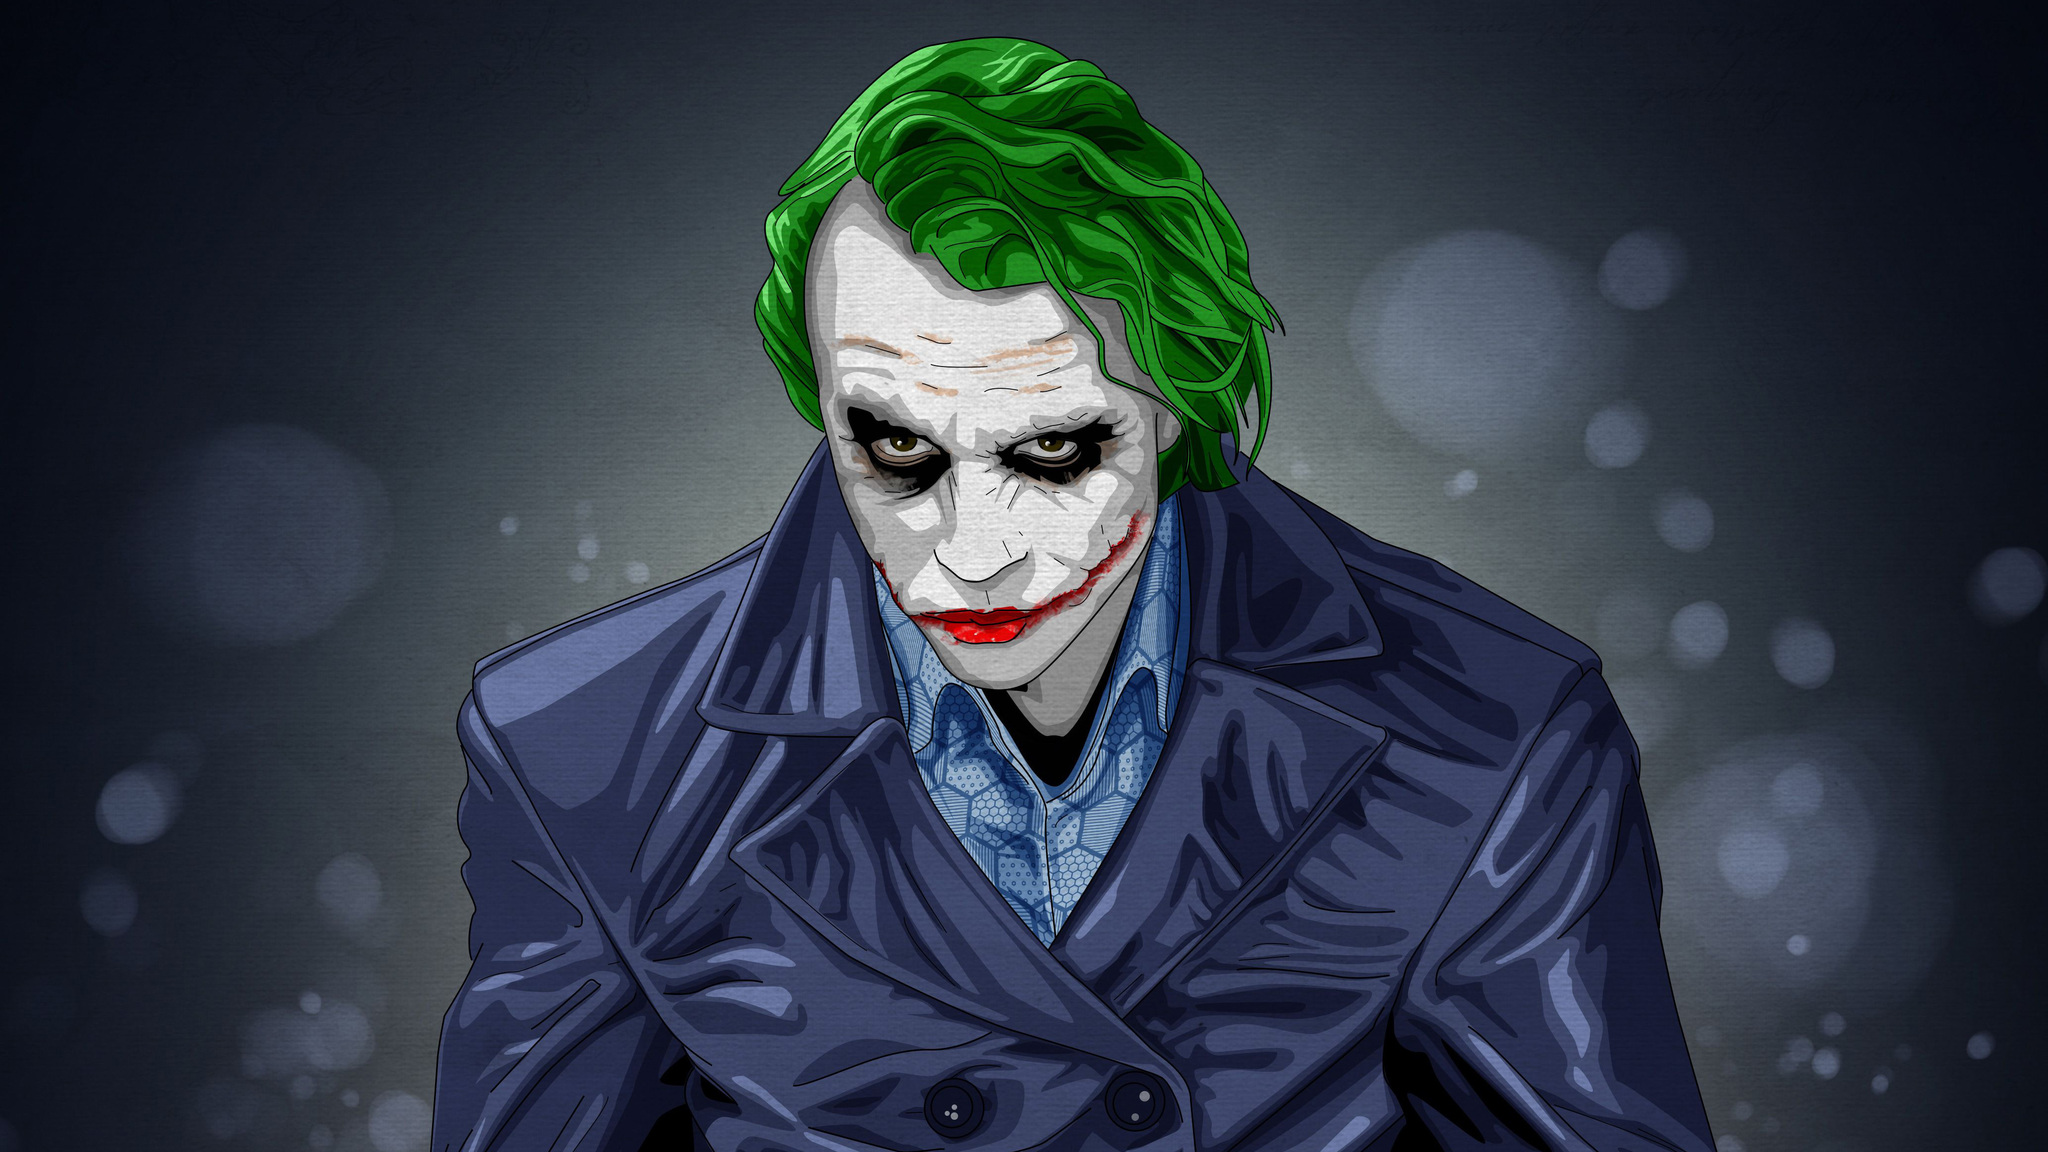 2048x1152 Joker Artwork 4k 2048x1152 Resolution HD 4k Wallpapers, Images,  Backgrounds, Photos and Pictures